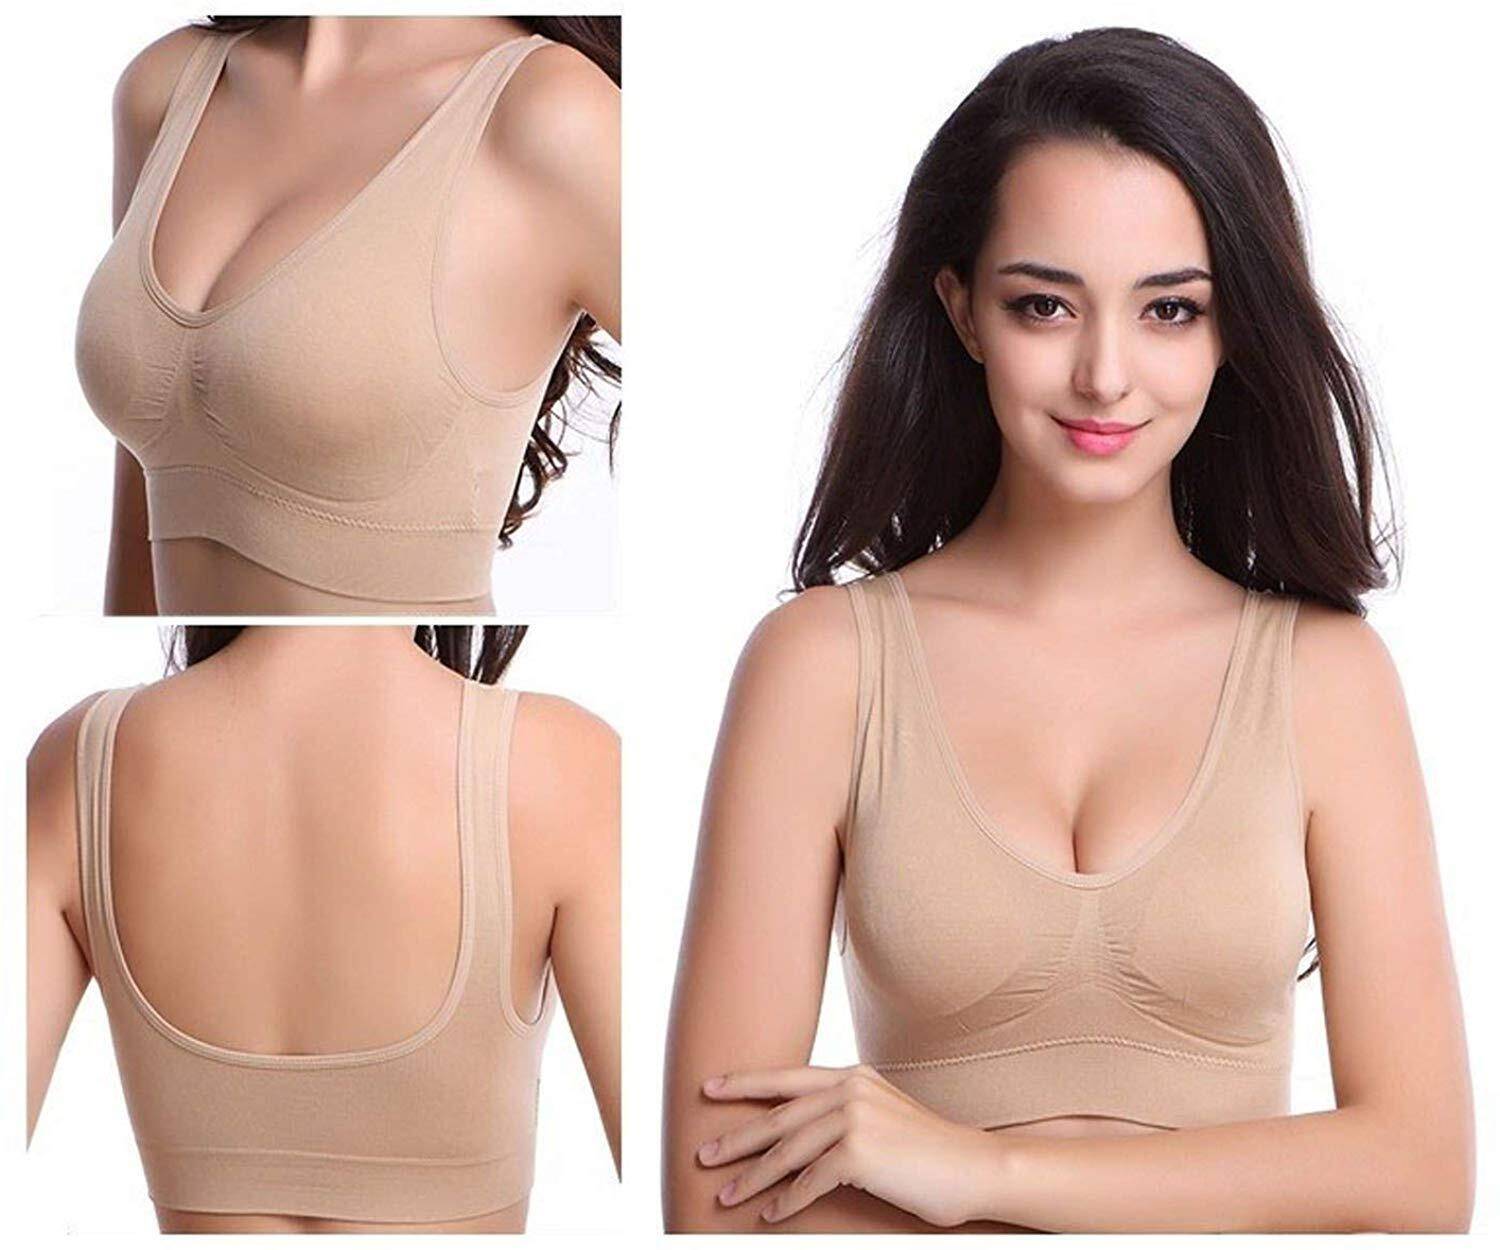 Padded Air Bra & Non-Wired Bra For Women & Girls, Free Size Adjustable Air  Bra - Brazzer for Women and Girls - No Straps,No Clips,No Wires,No Pain